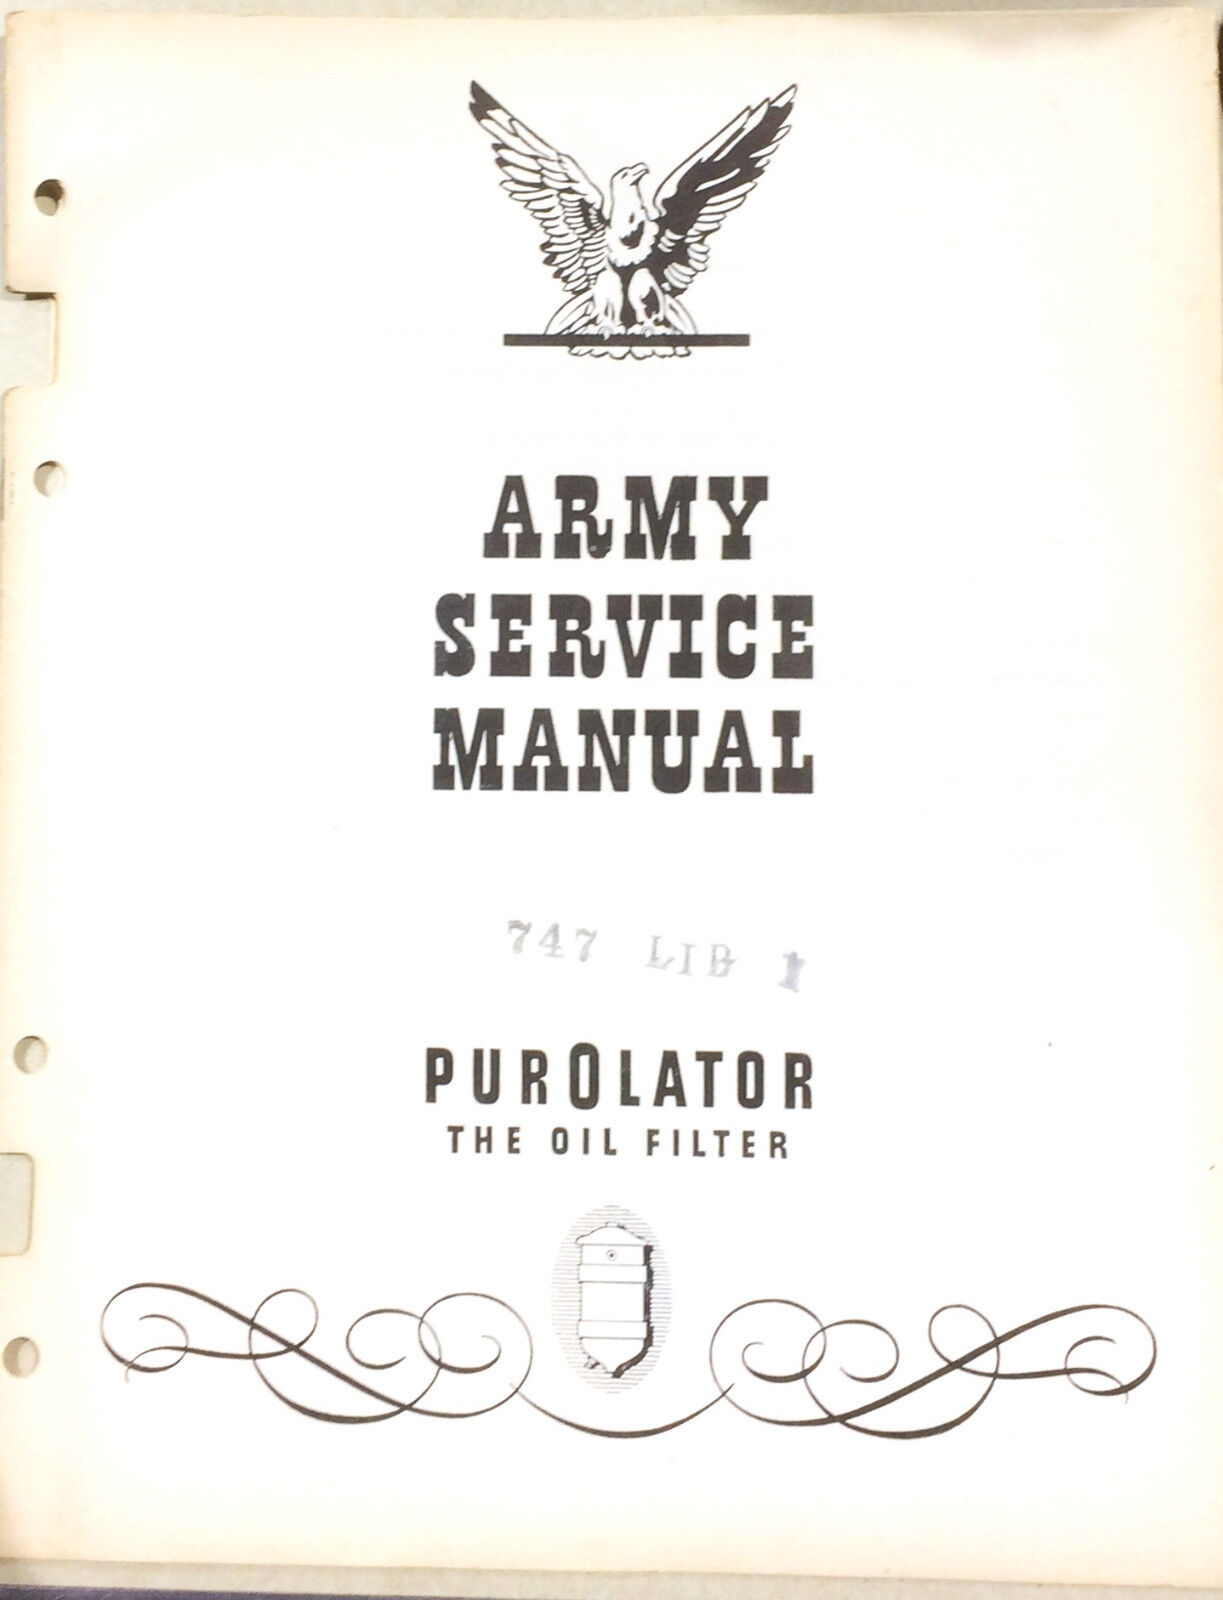 WW2 ArmyService Manual The Oil Filter by PurOlator GPW MB GMC Dodge CCKW DUKW